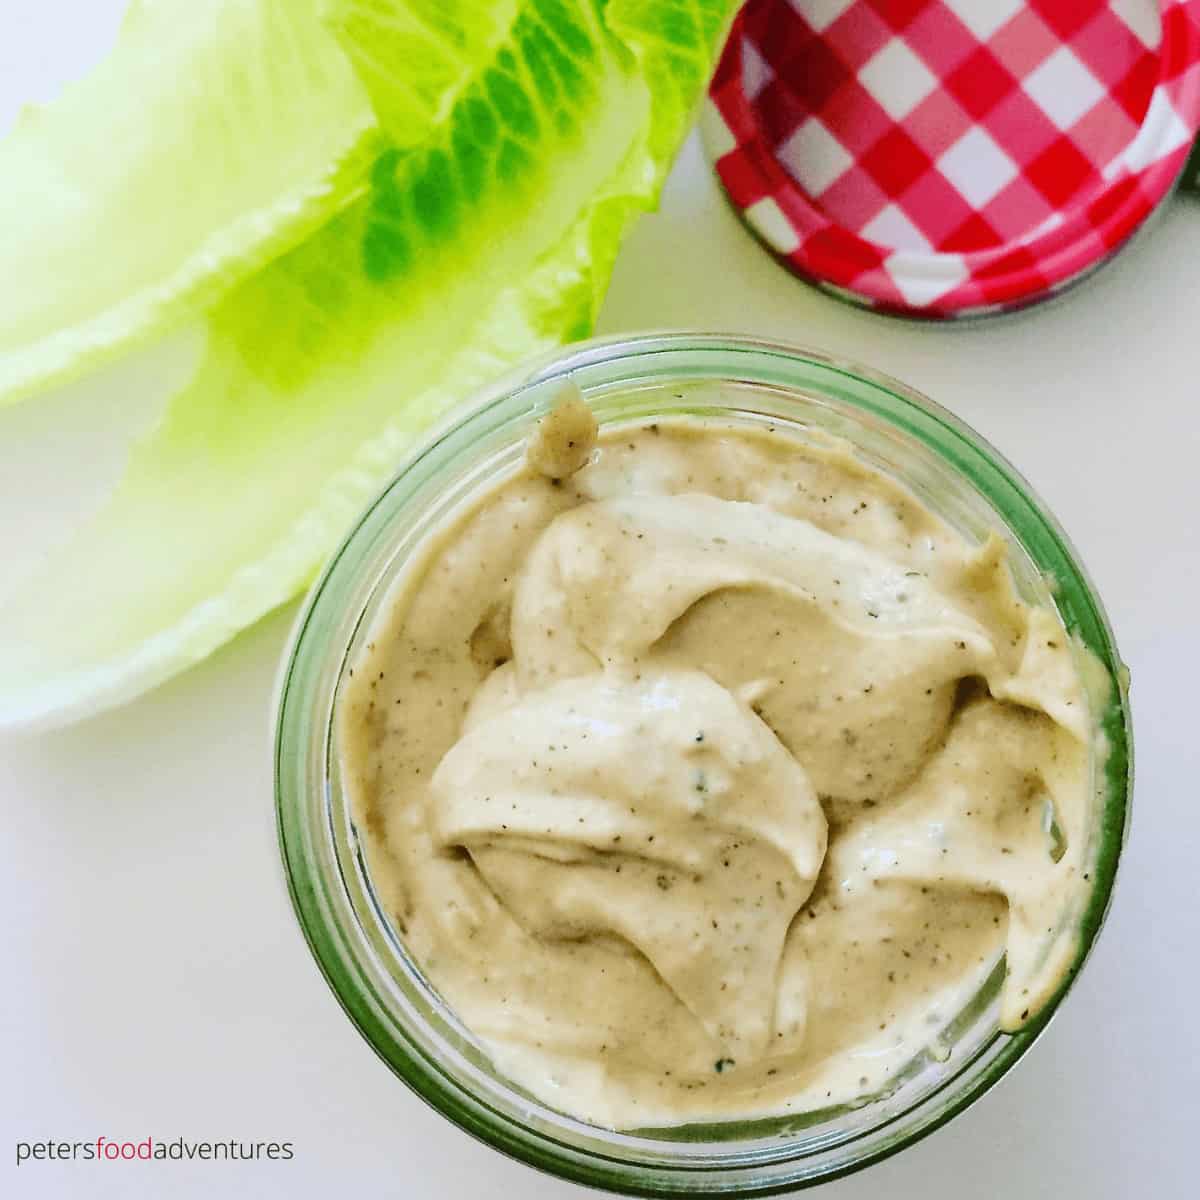 Homemade Caesar Salad Dressing recipe is so easy to make with fresh garlic, anchovies, dijon, eggs, oil and more. Perfect for a Caesar Salad or a vegetable dip. A little goes a long way.